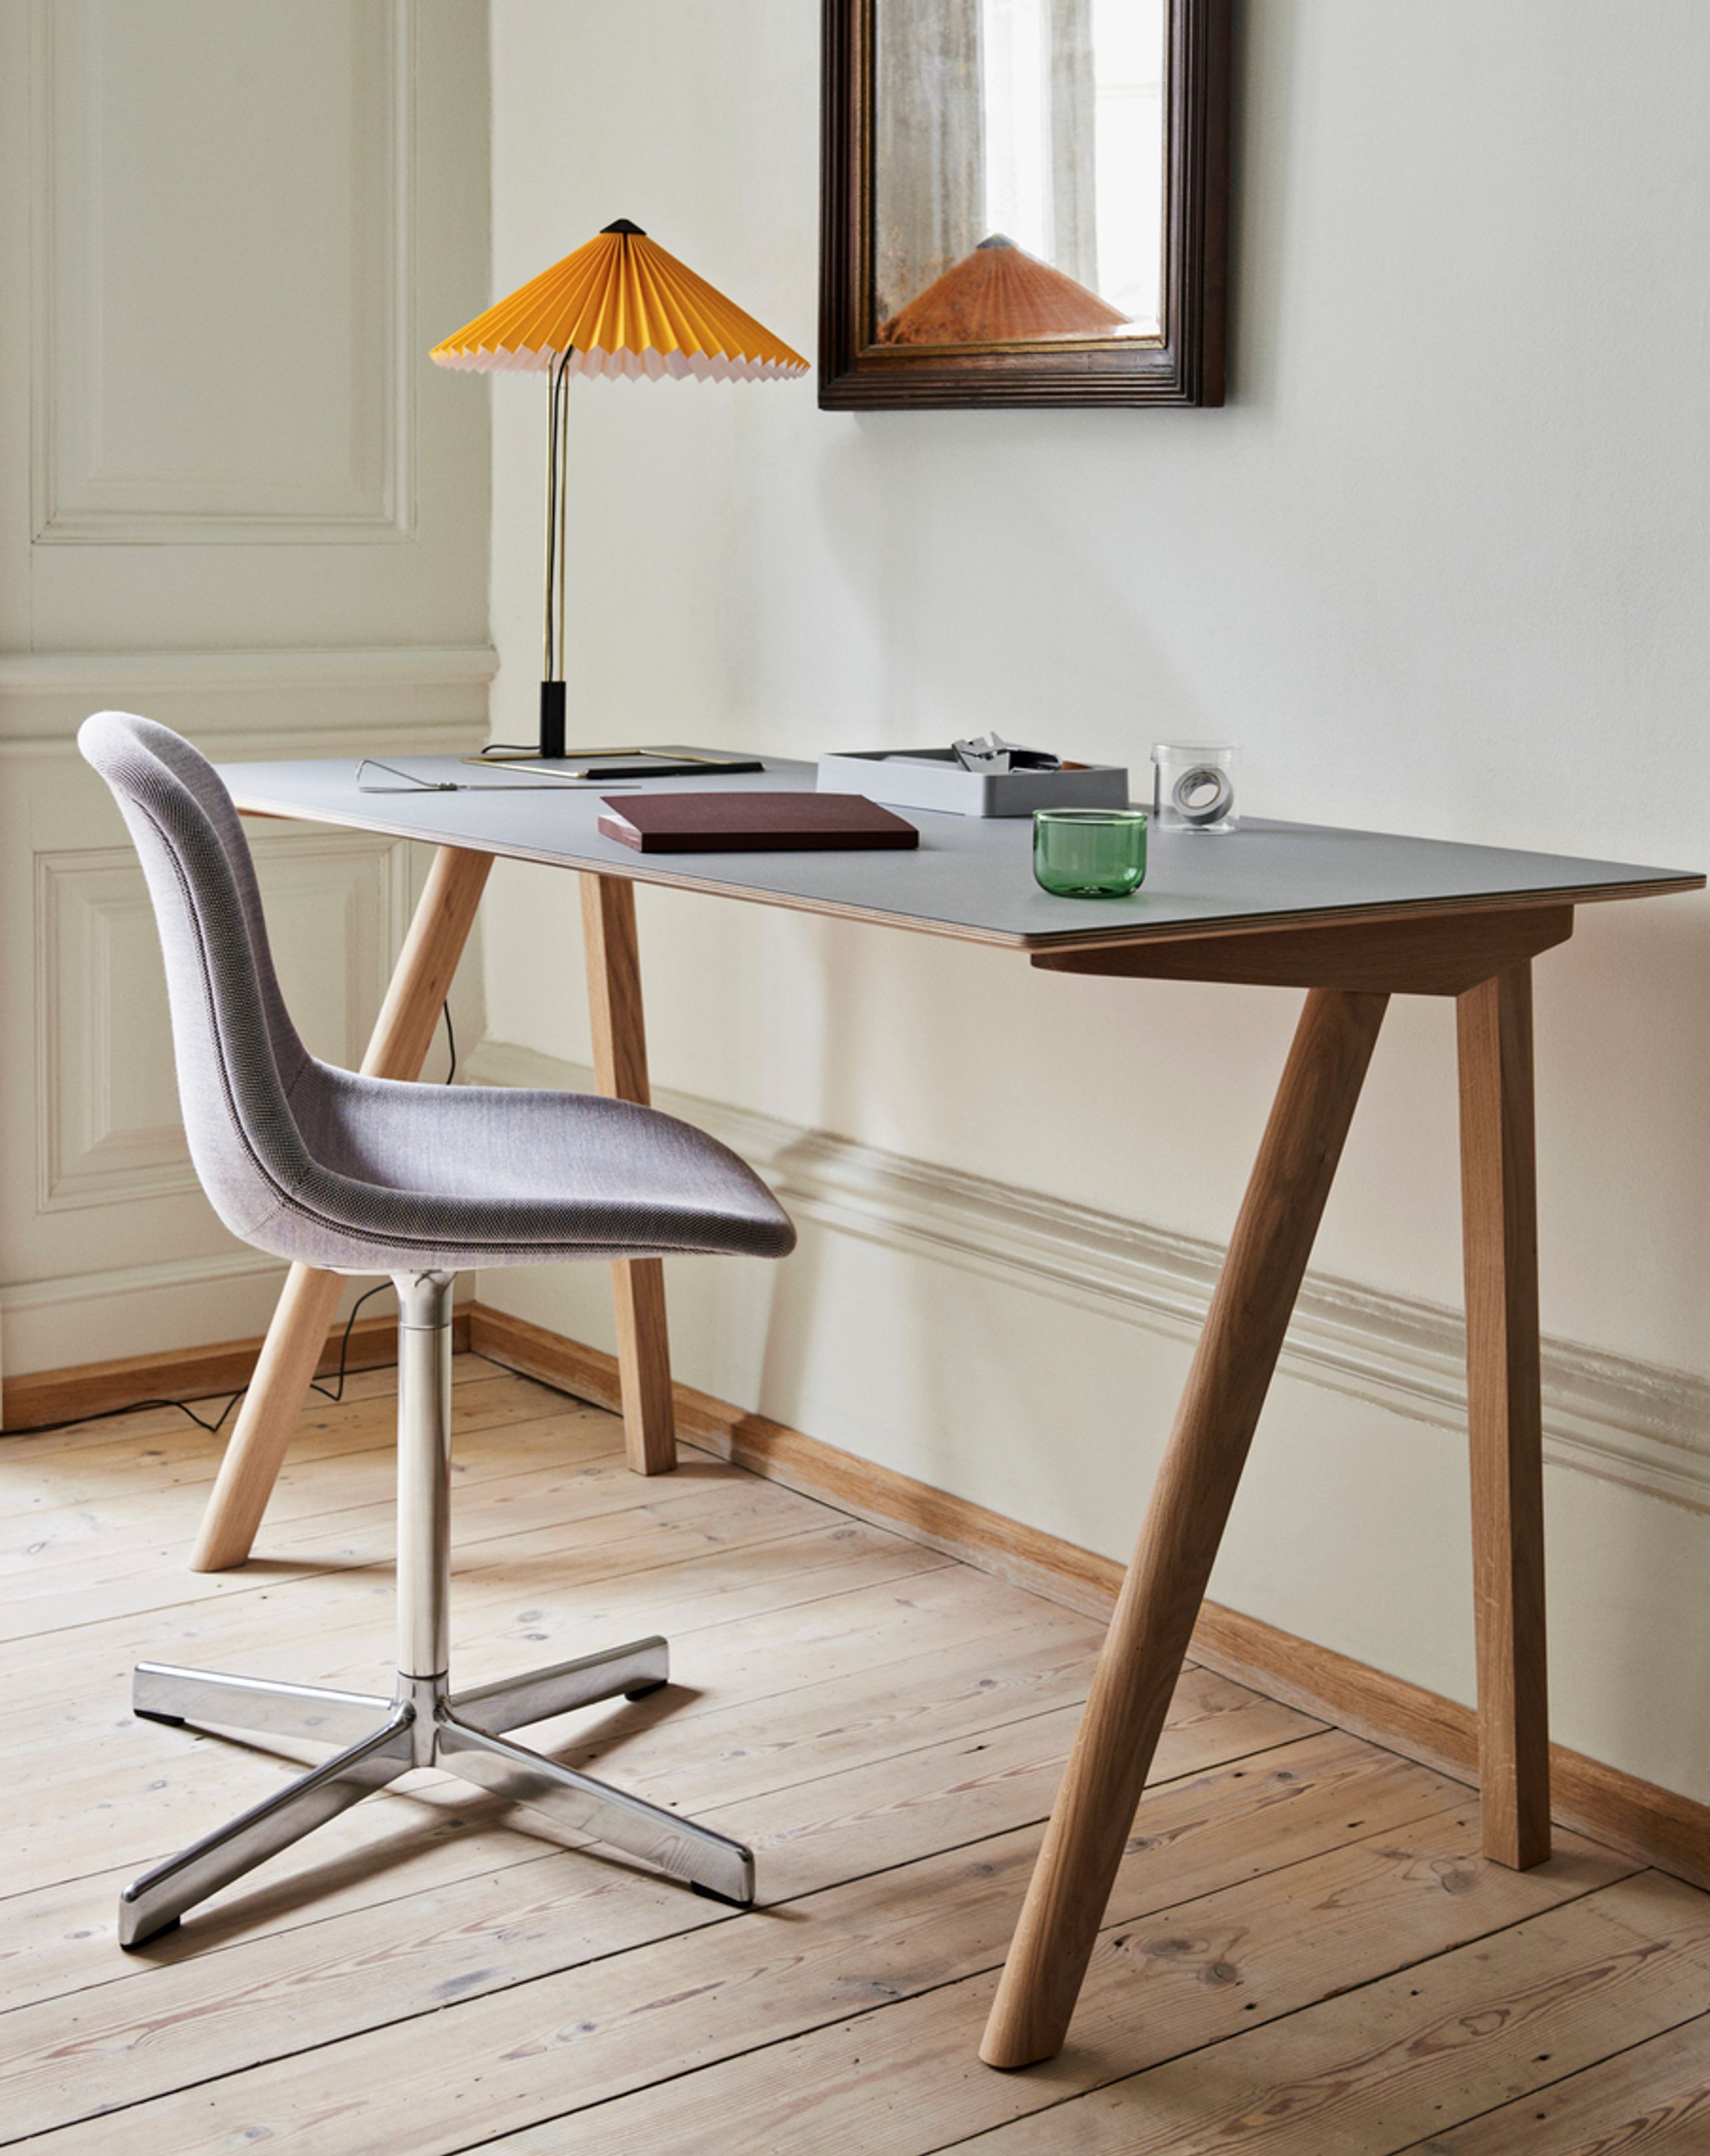 HAY - CPH 90 Desk - Desk - Walnut Waster-Based Lacquered